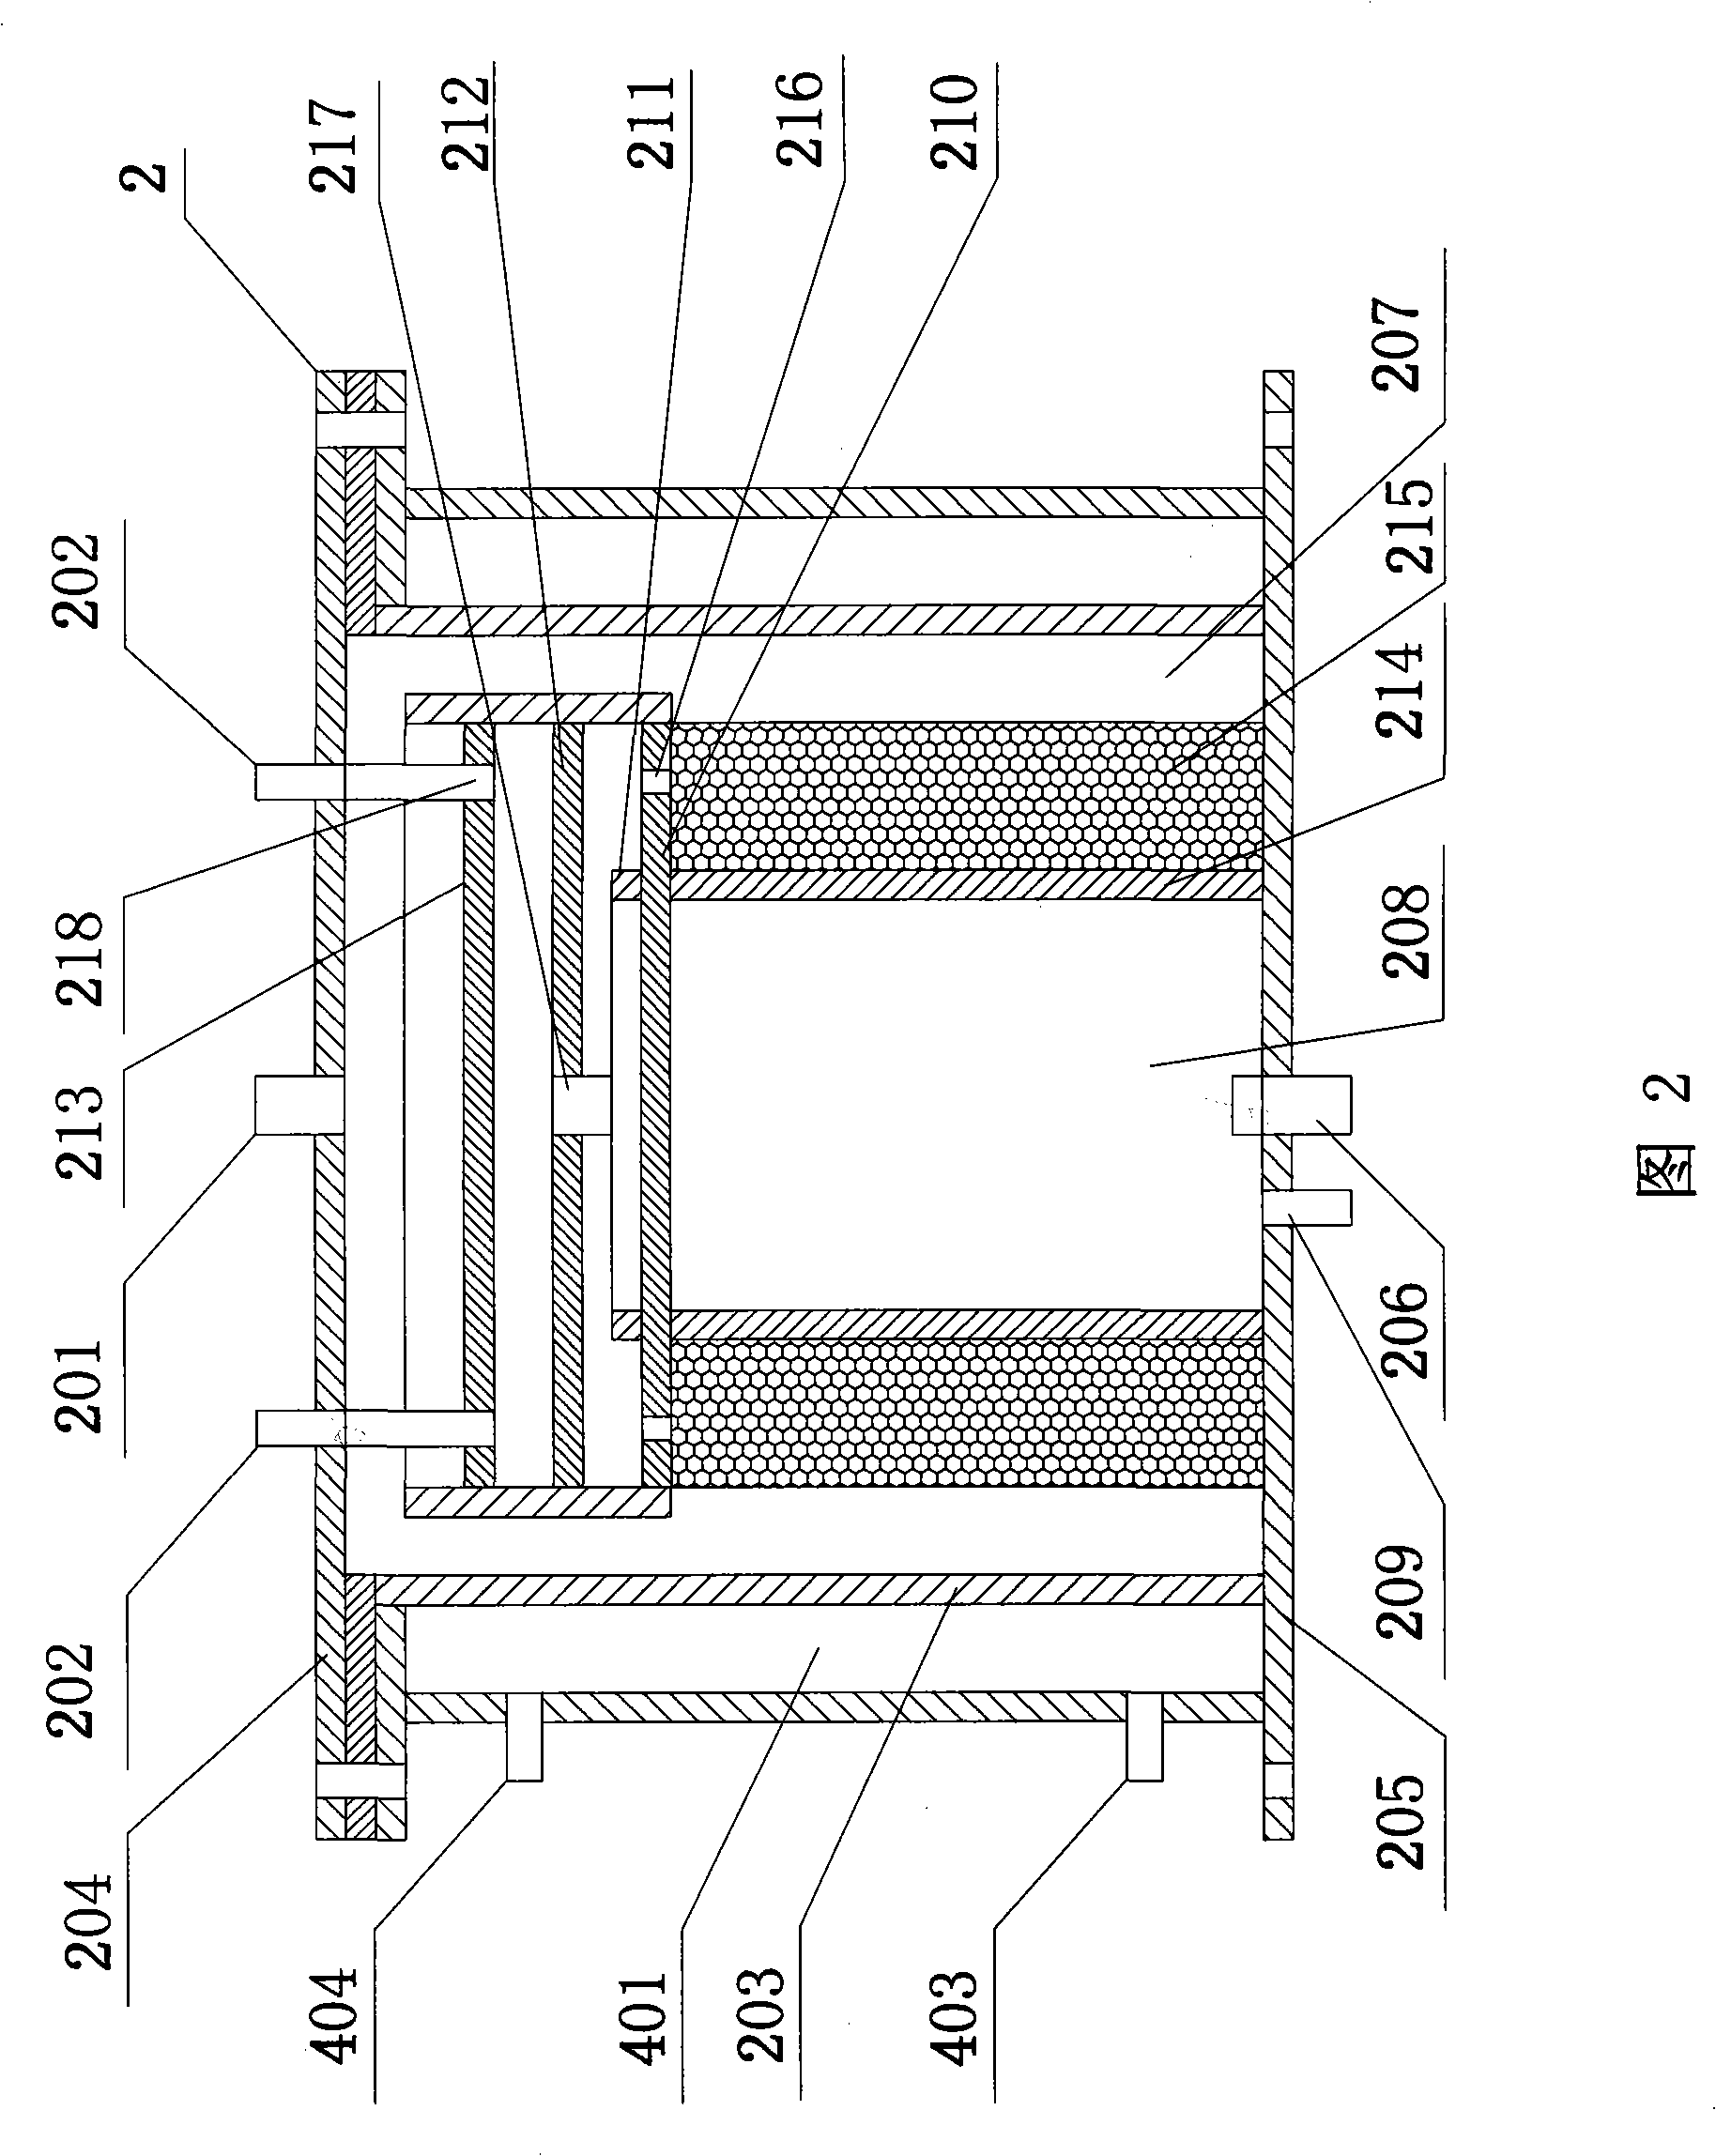 Pipe gas phase biological filtering device